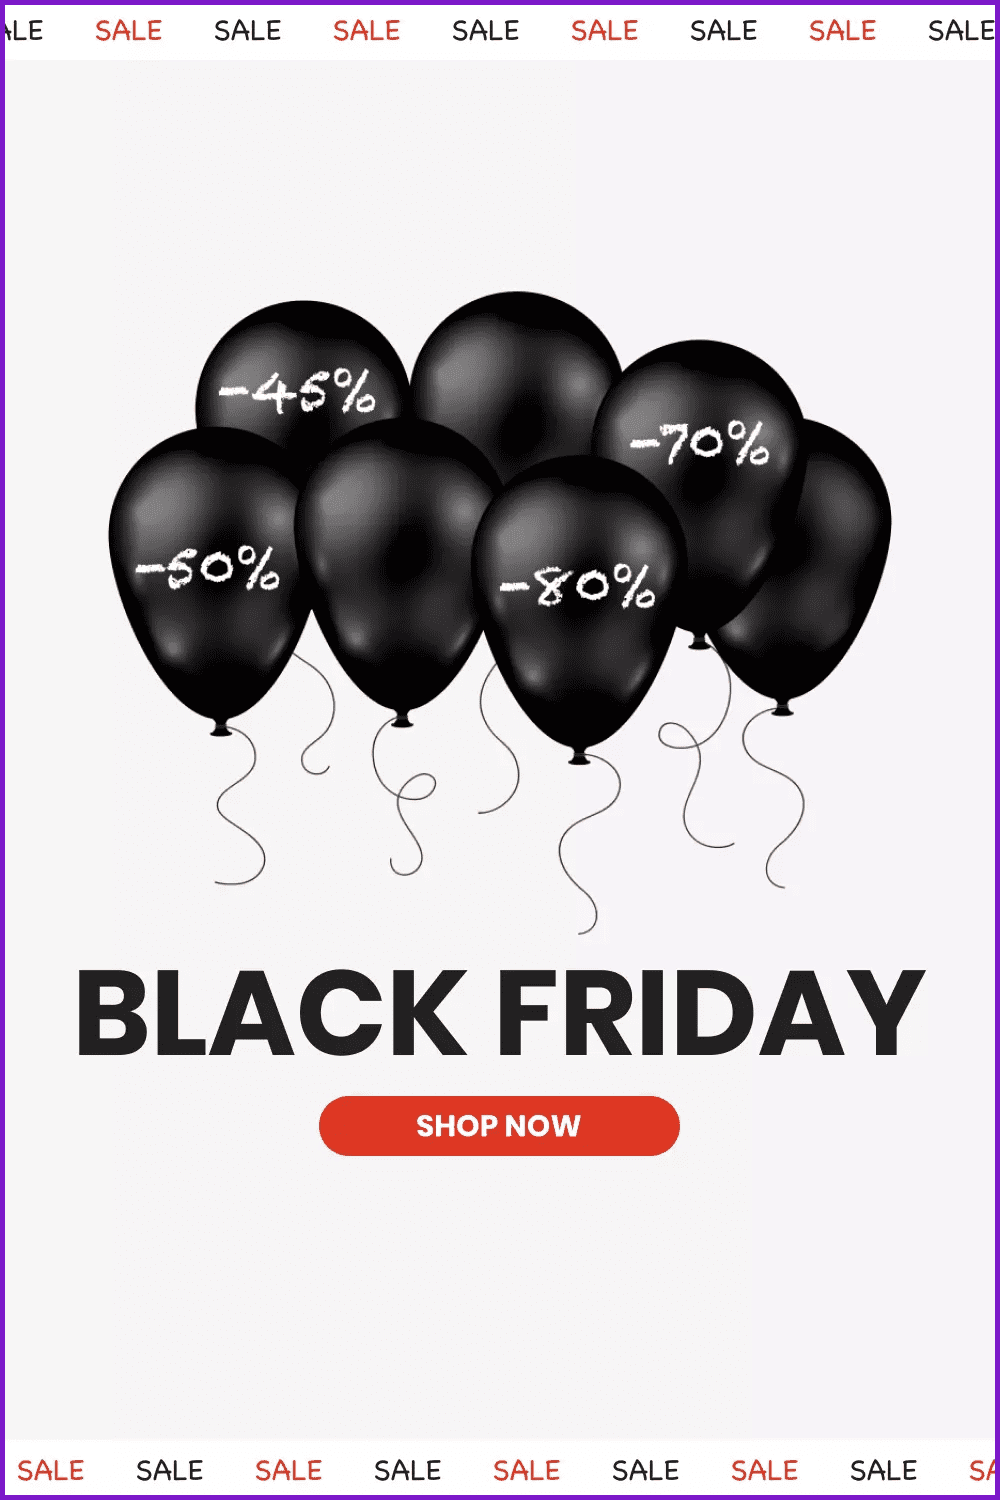 Poster with black text, white background and black balloons for Black Friday.